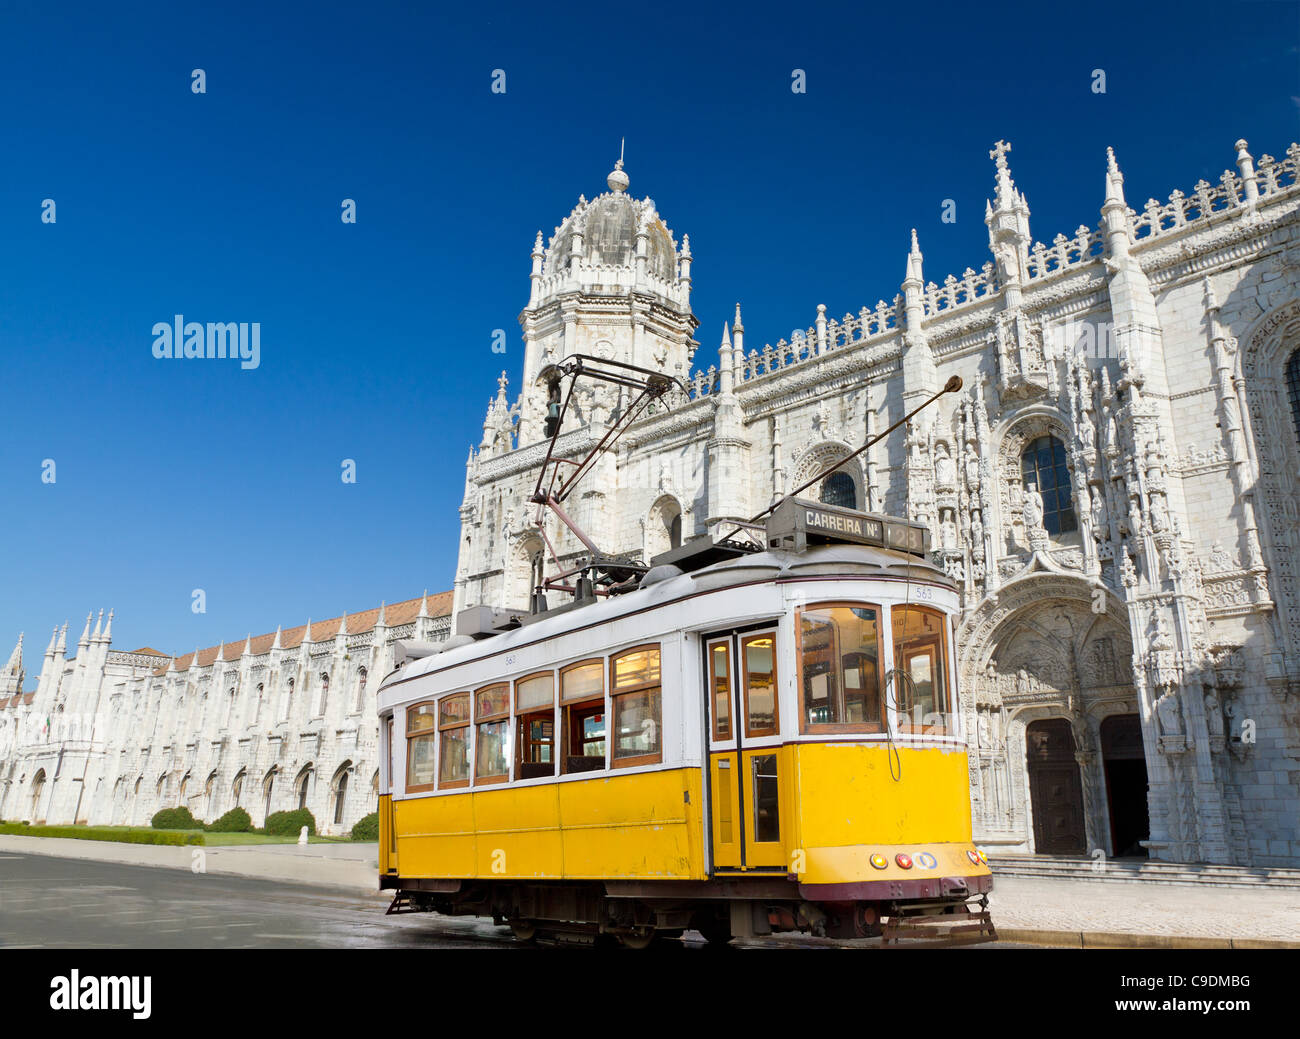 historic classic yellow tram of Lisbon built partially of wood in front of famous Jeronimos monastery, Portugal Stock Photo